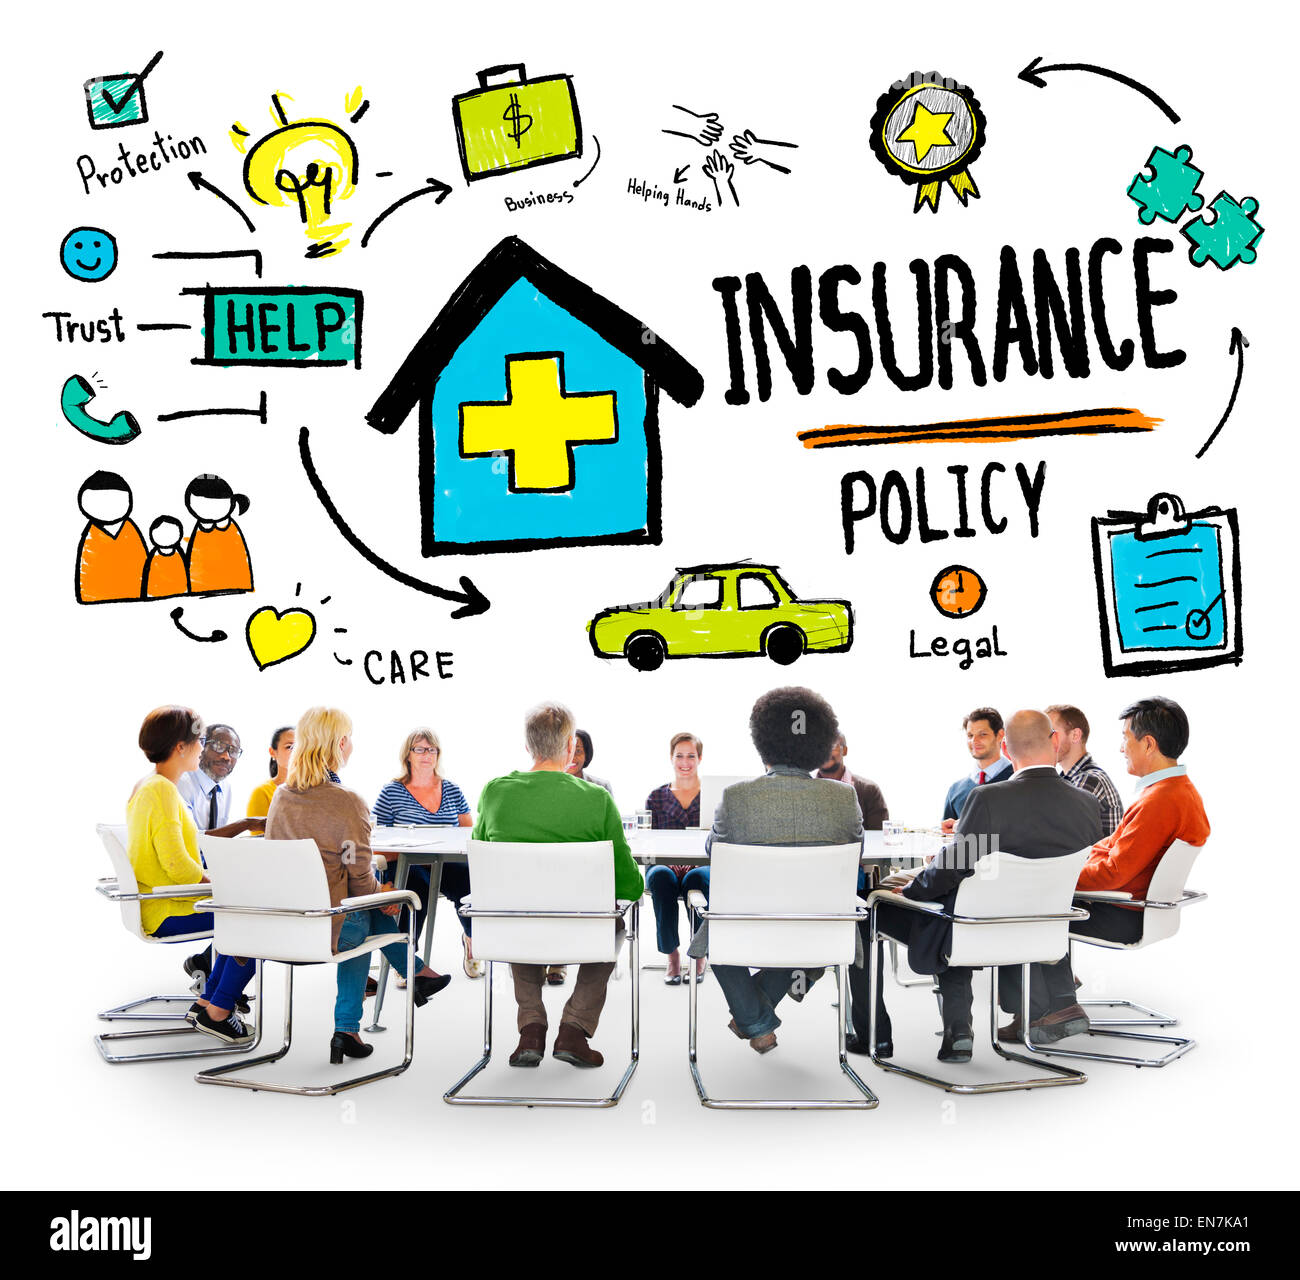 Diversity Casual People Insurance Policy Brainstorming Concept Stock Photo